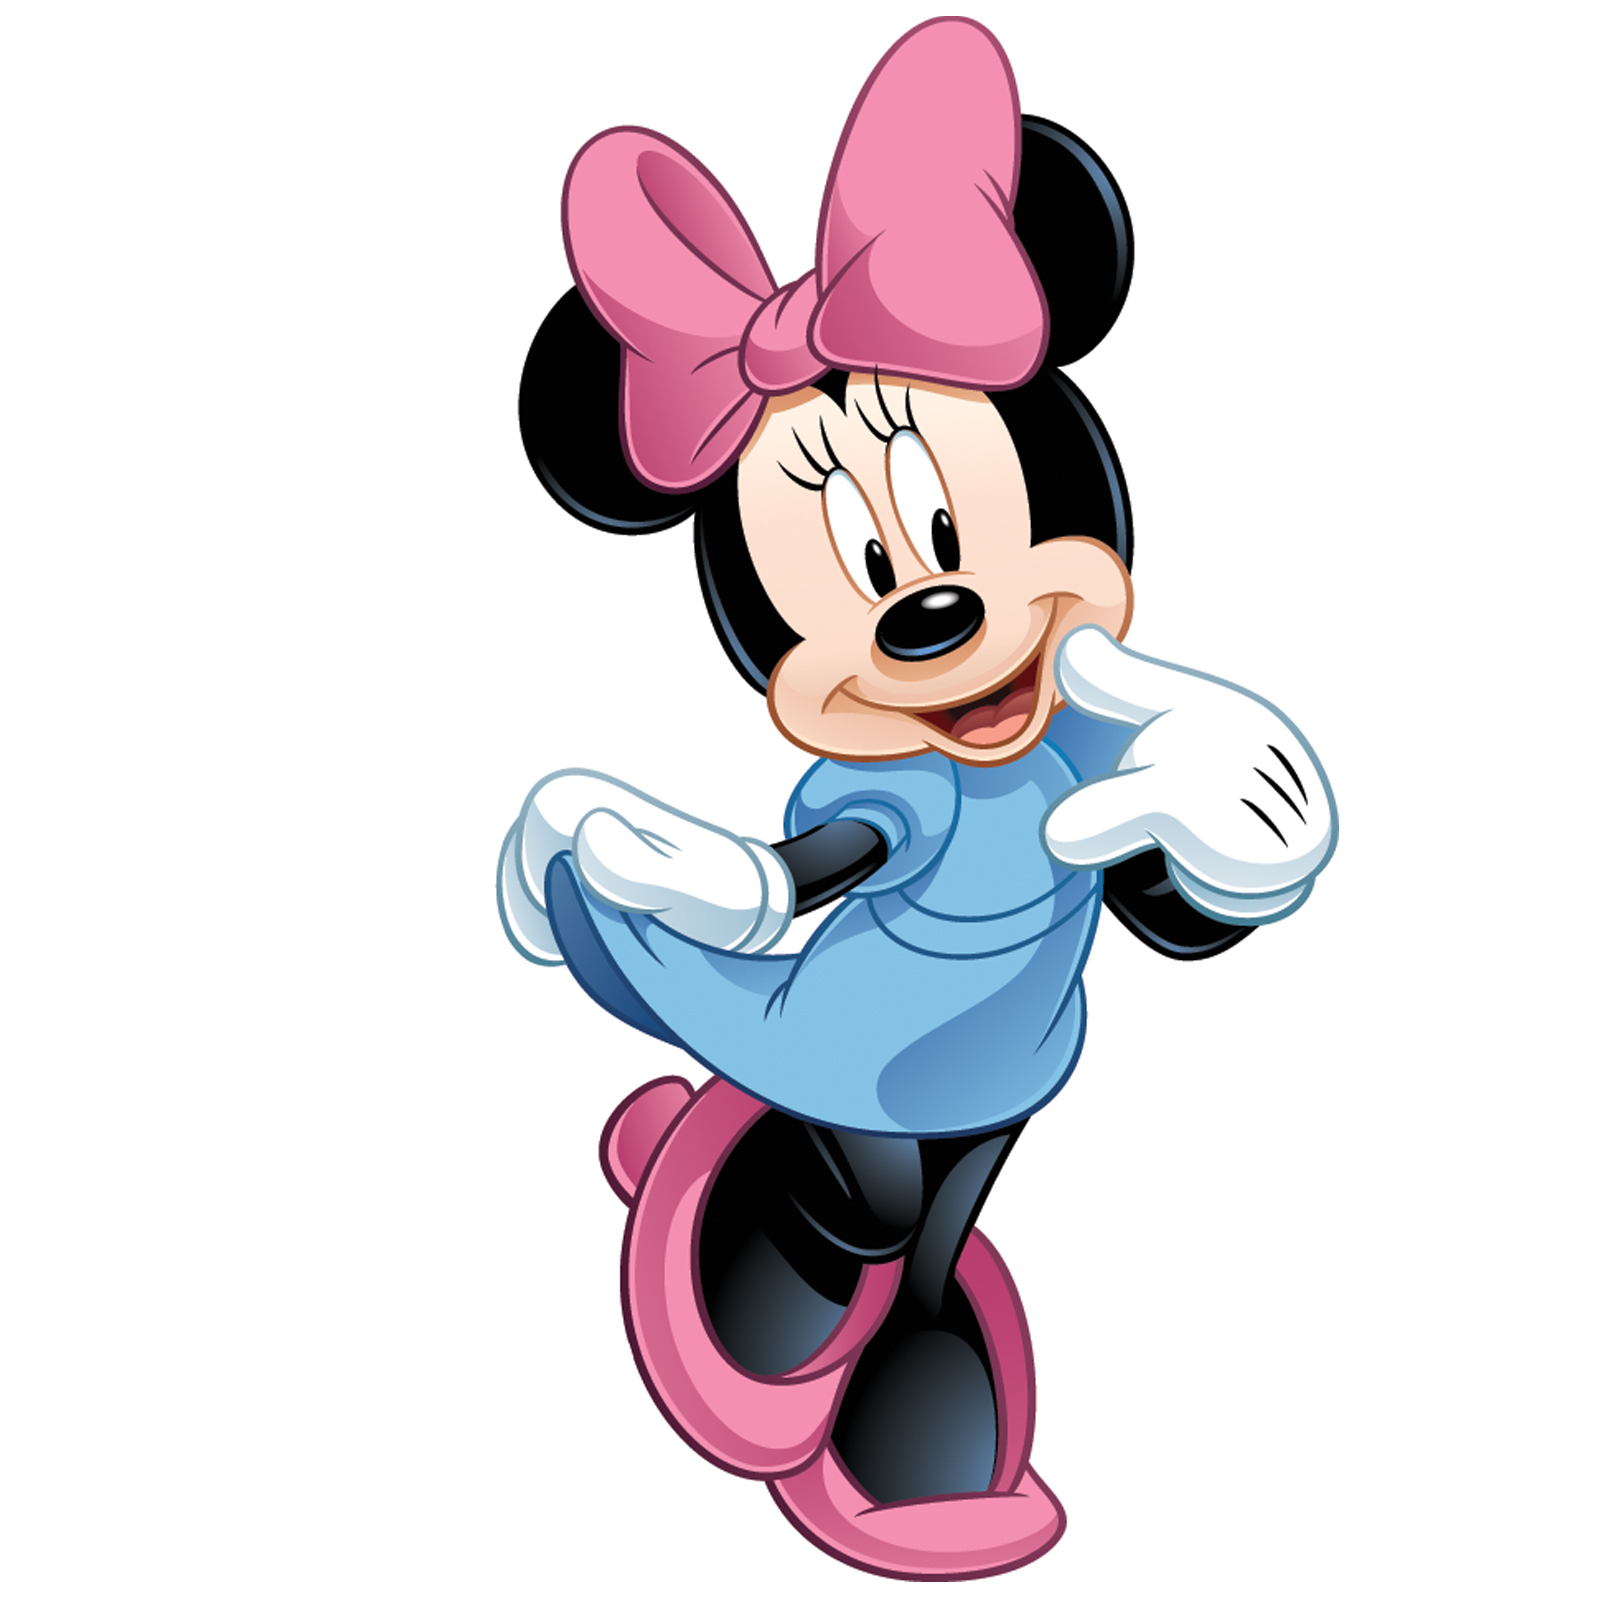 Images of minnie mouse